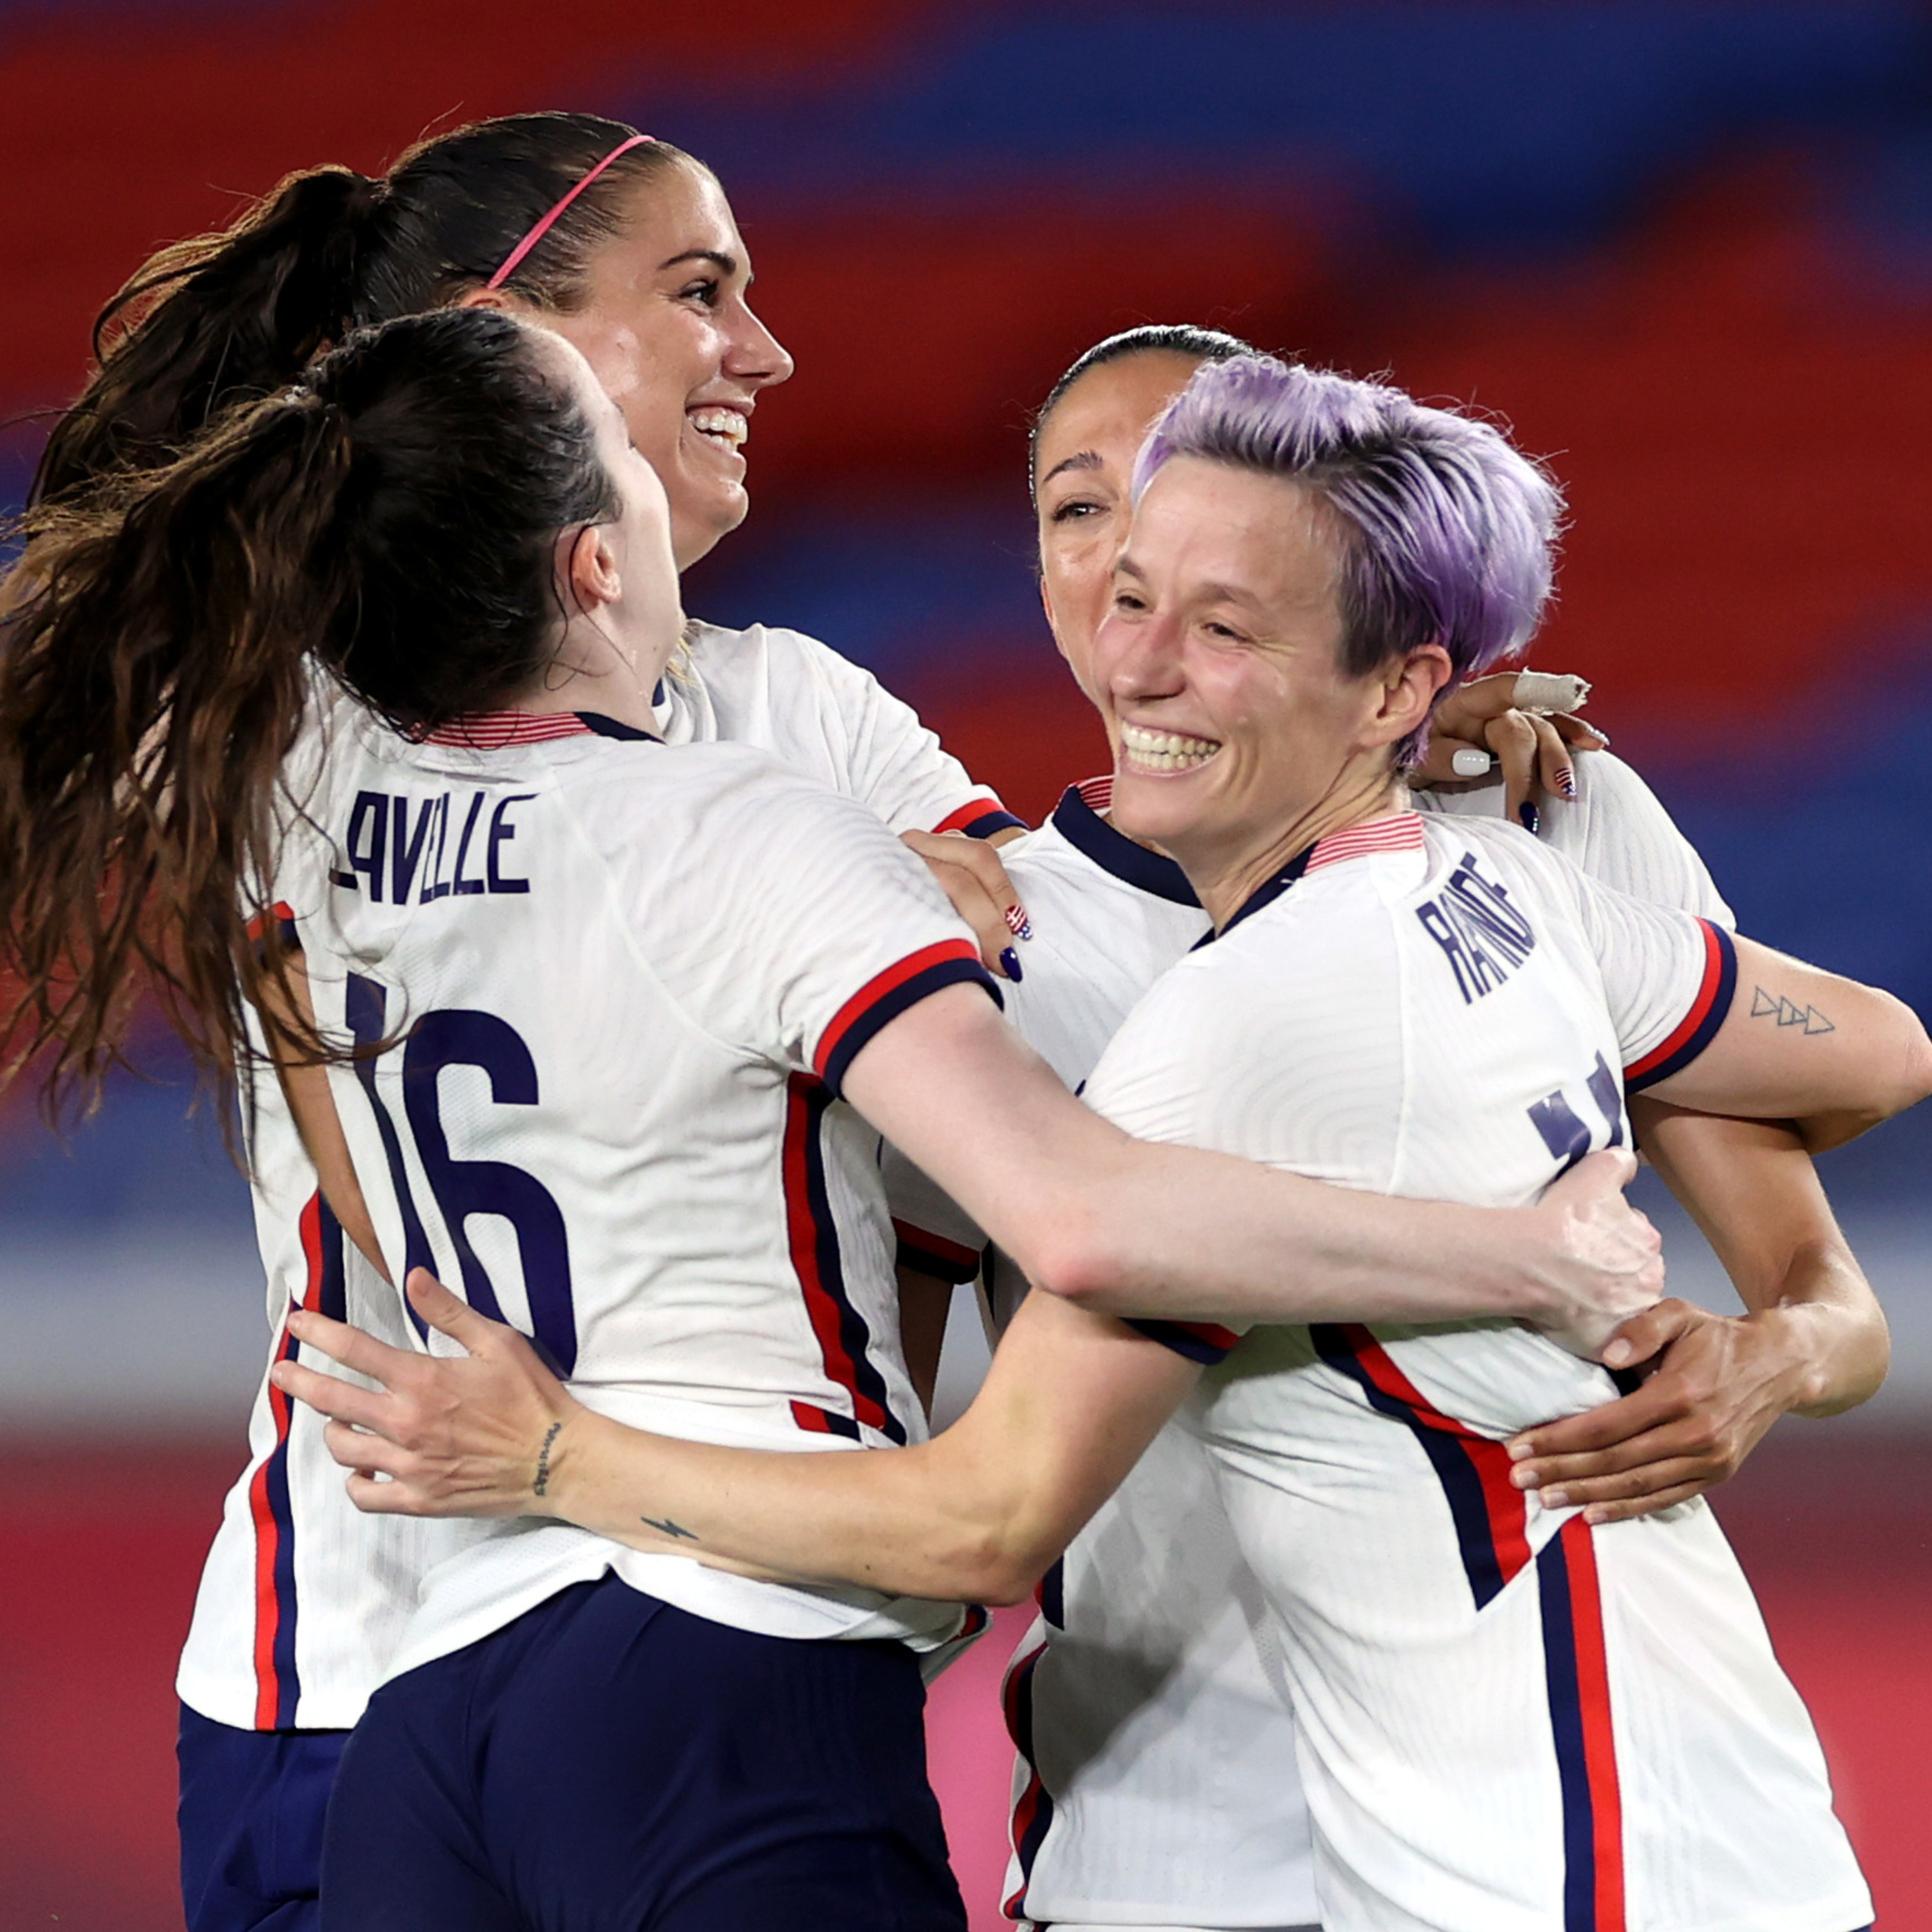 U.S. Soccer Agrees to New CBA with Top Men's, Women's Players Guaranteeing Equal..